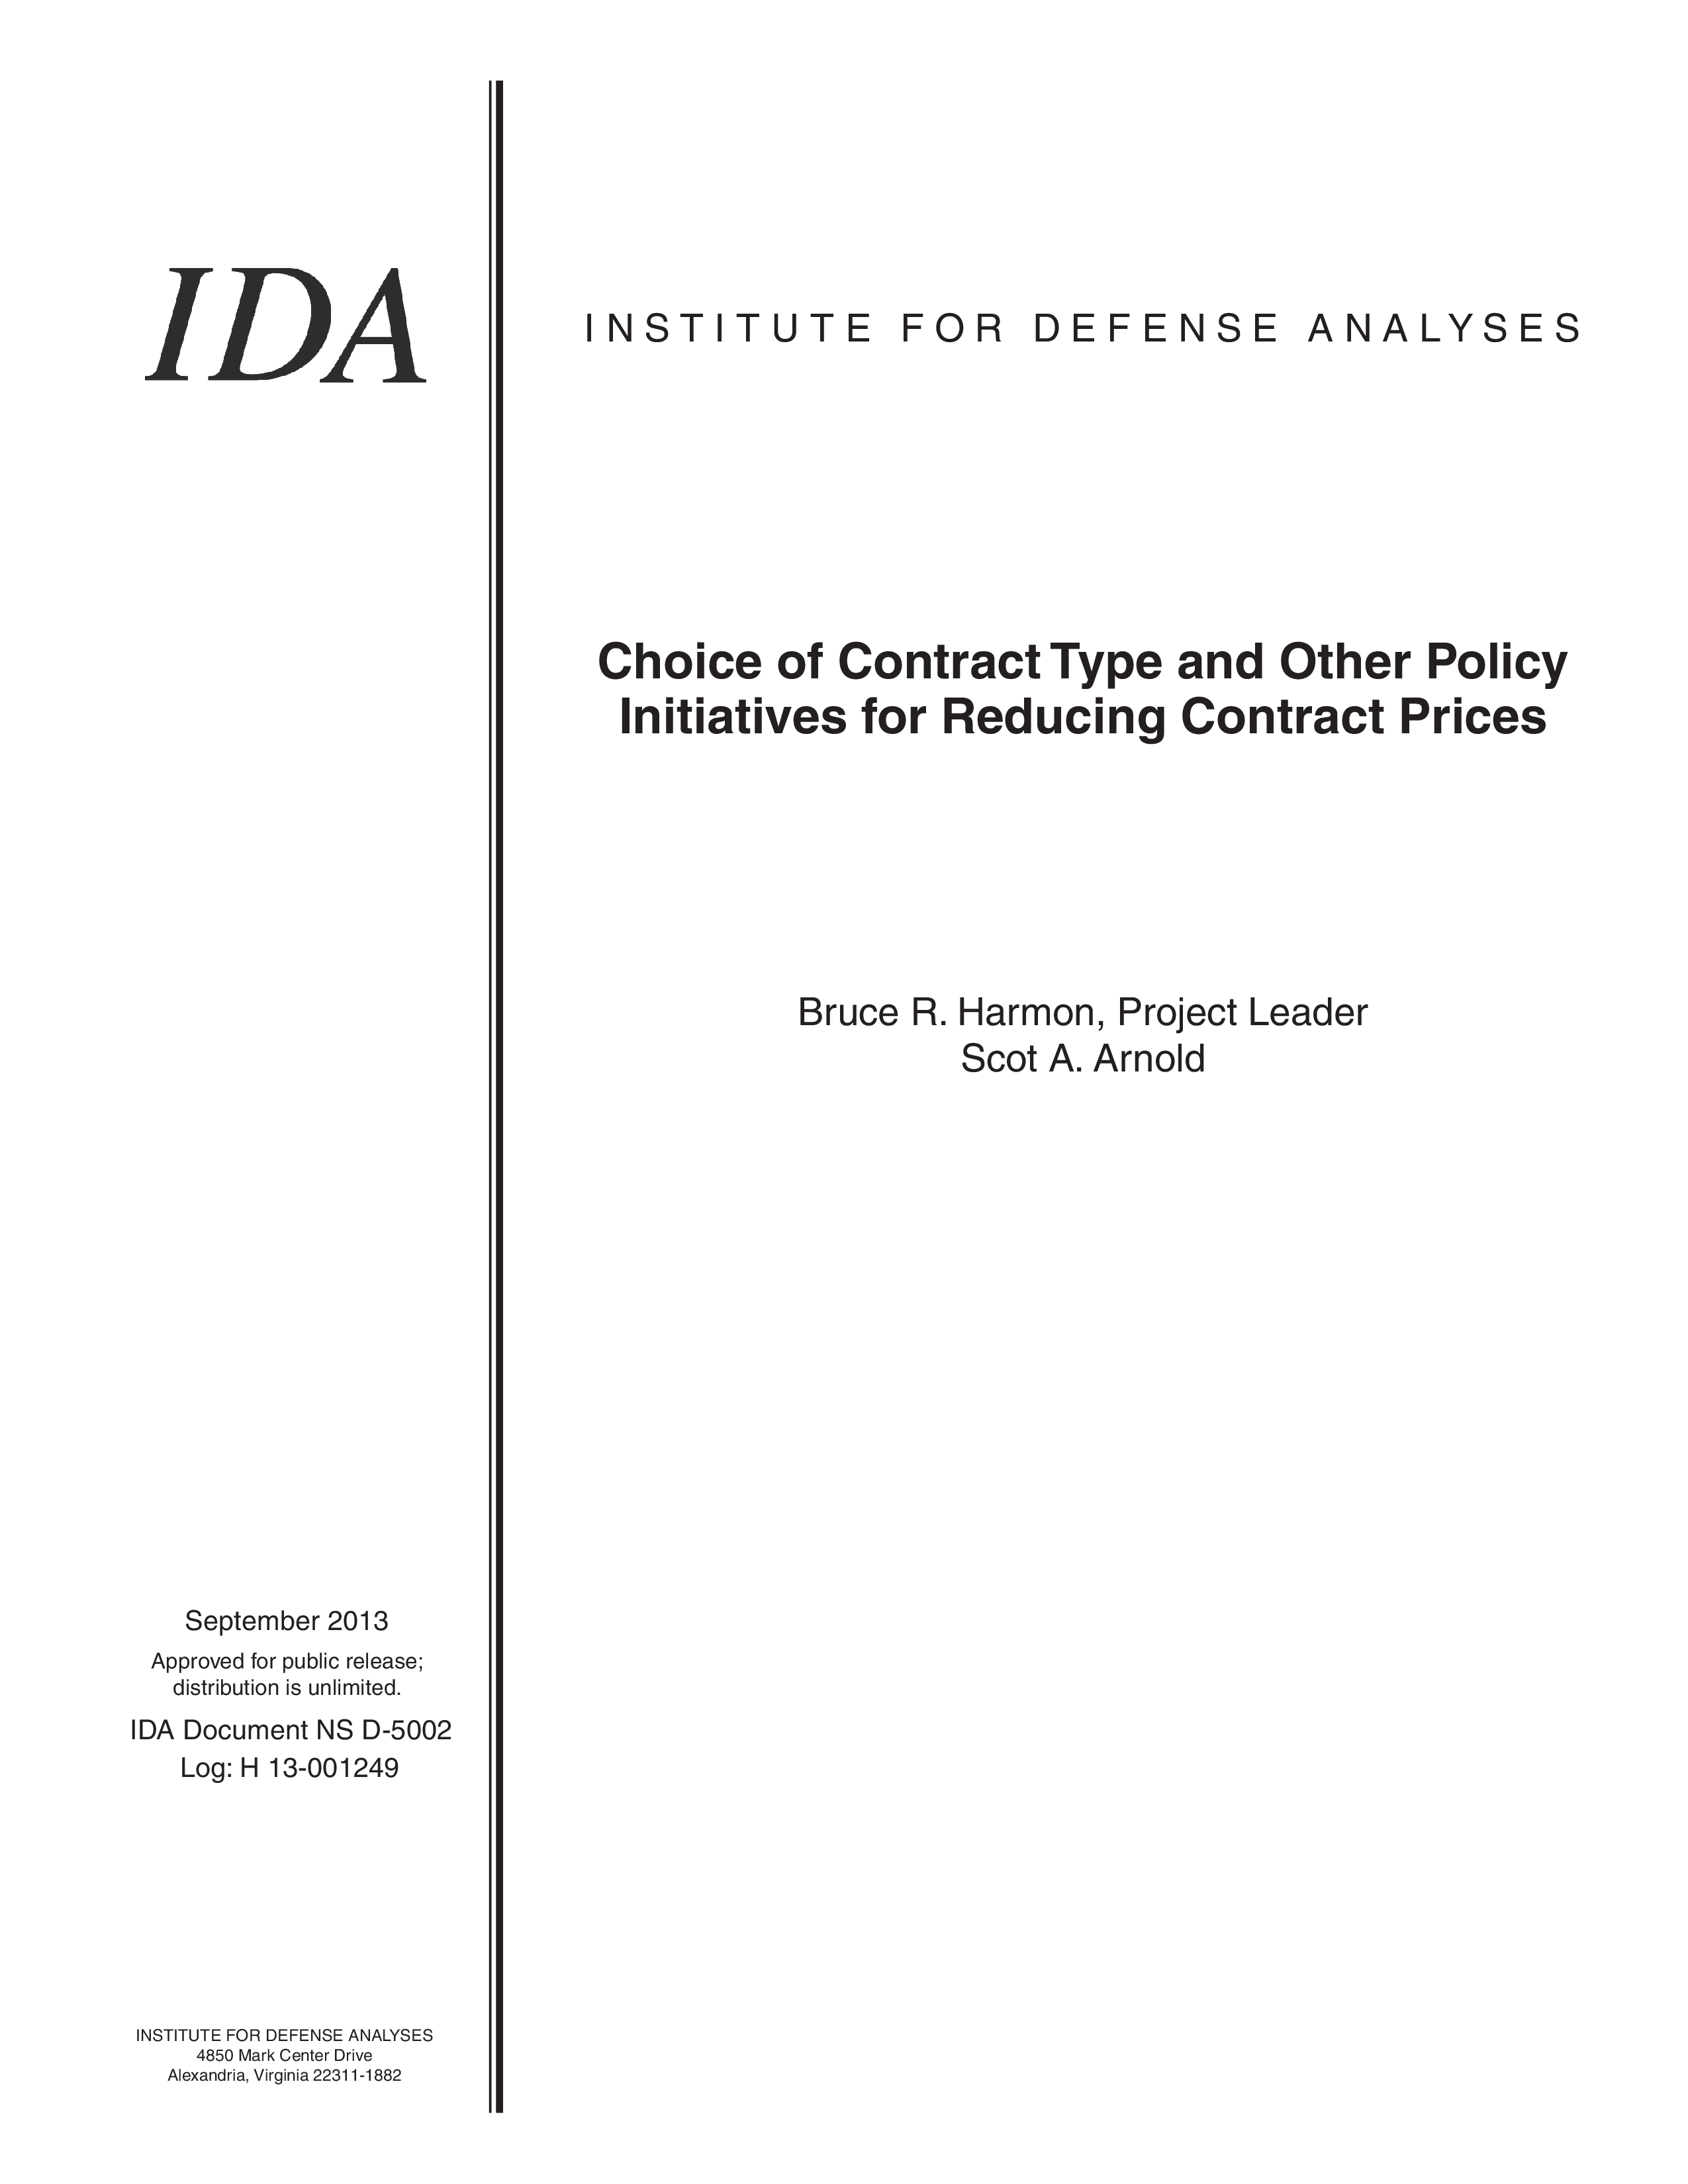 Choice of Contract Type and Other Policy Initiatives for Reducing Contract PricesNS 